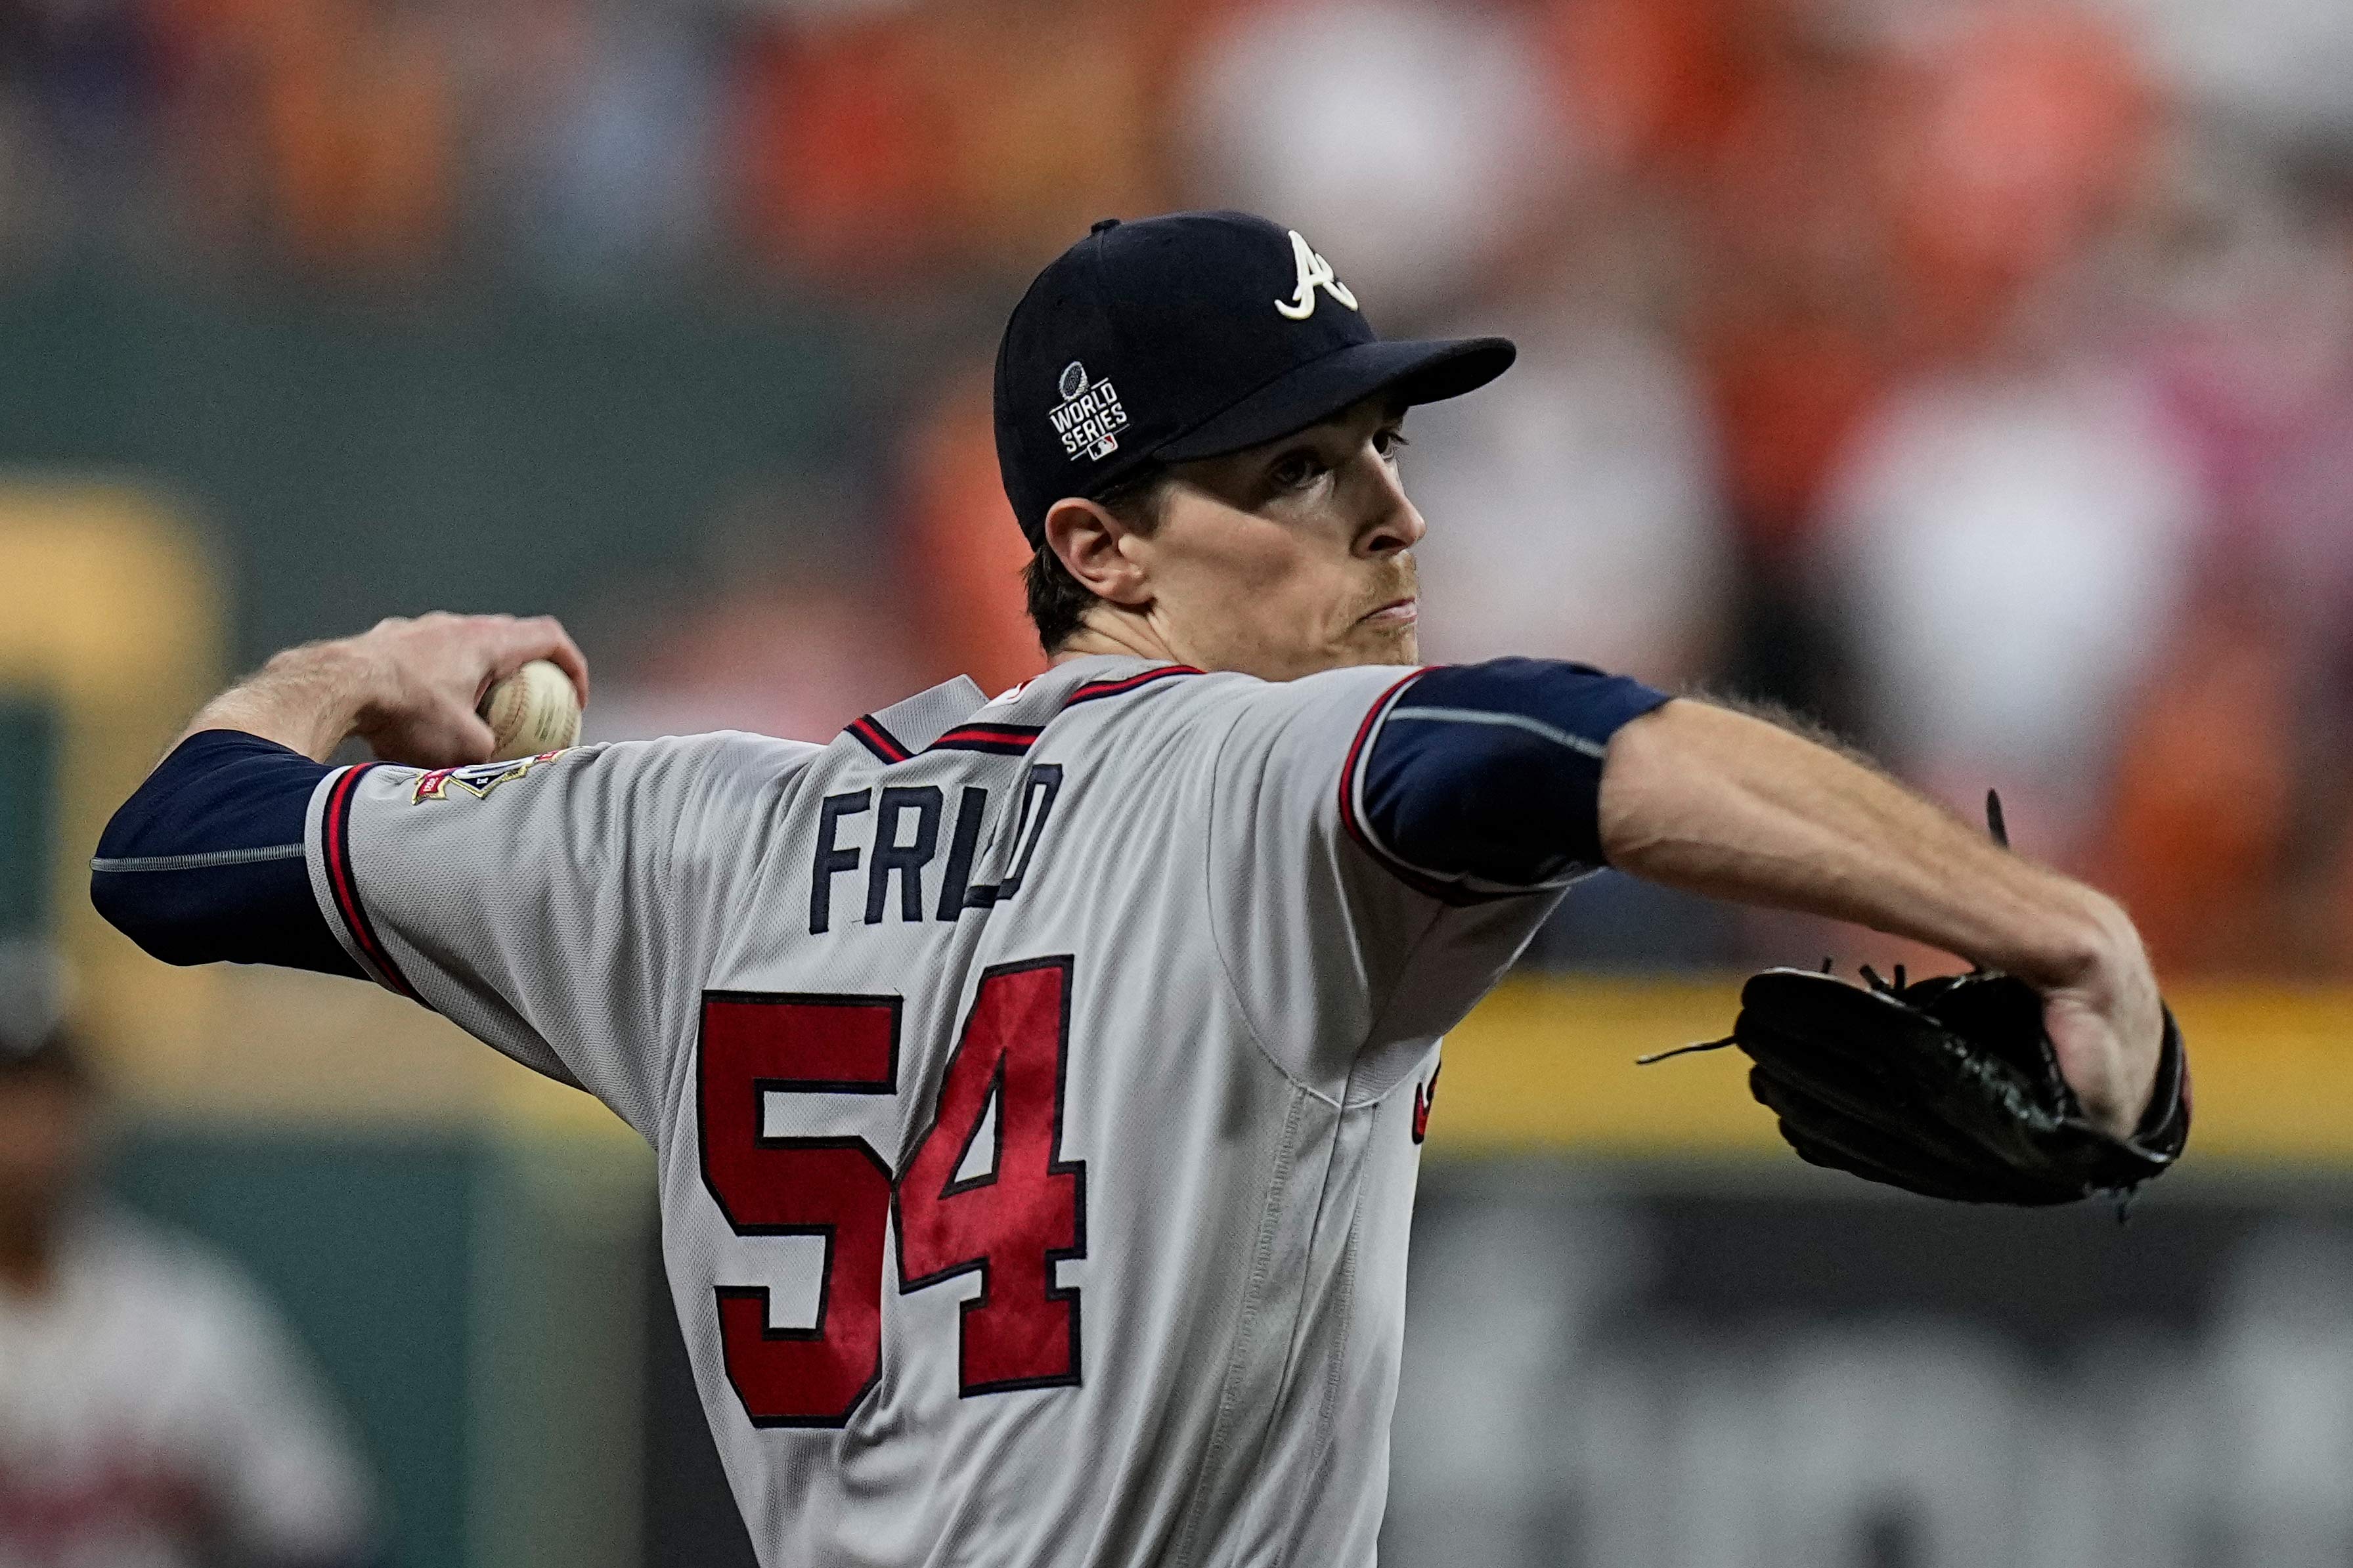 Max Fried who is the Braves pitcher for Game 5 tonight